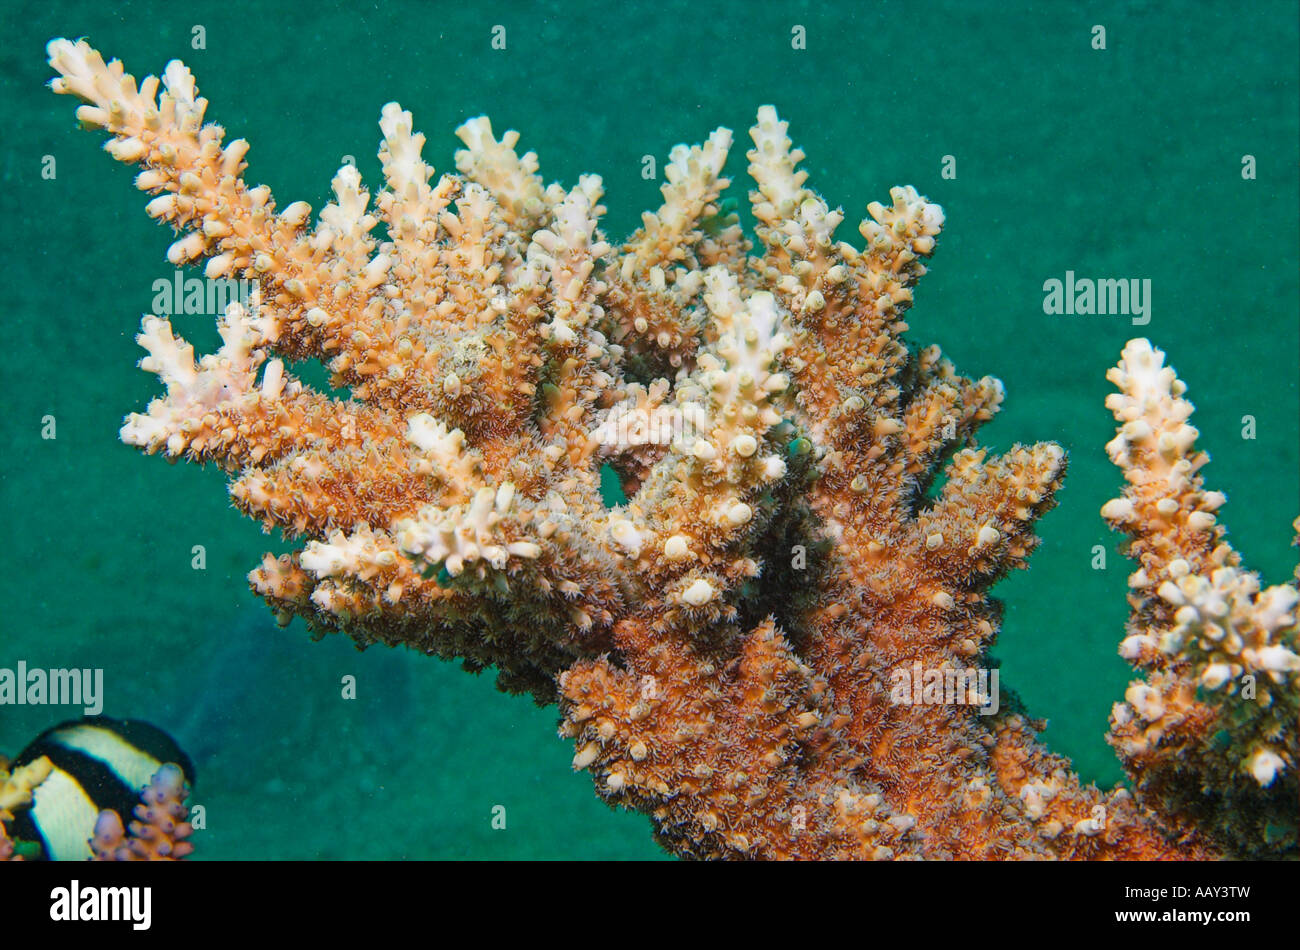 Closeup 'staghorn coral' Acropora with feeding polyps extended out Red Sea Egypt Stock Photo